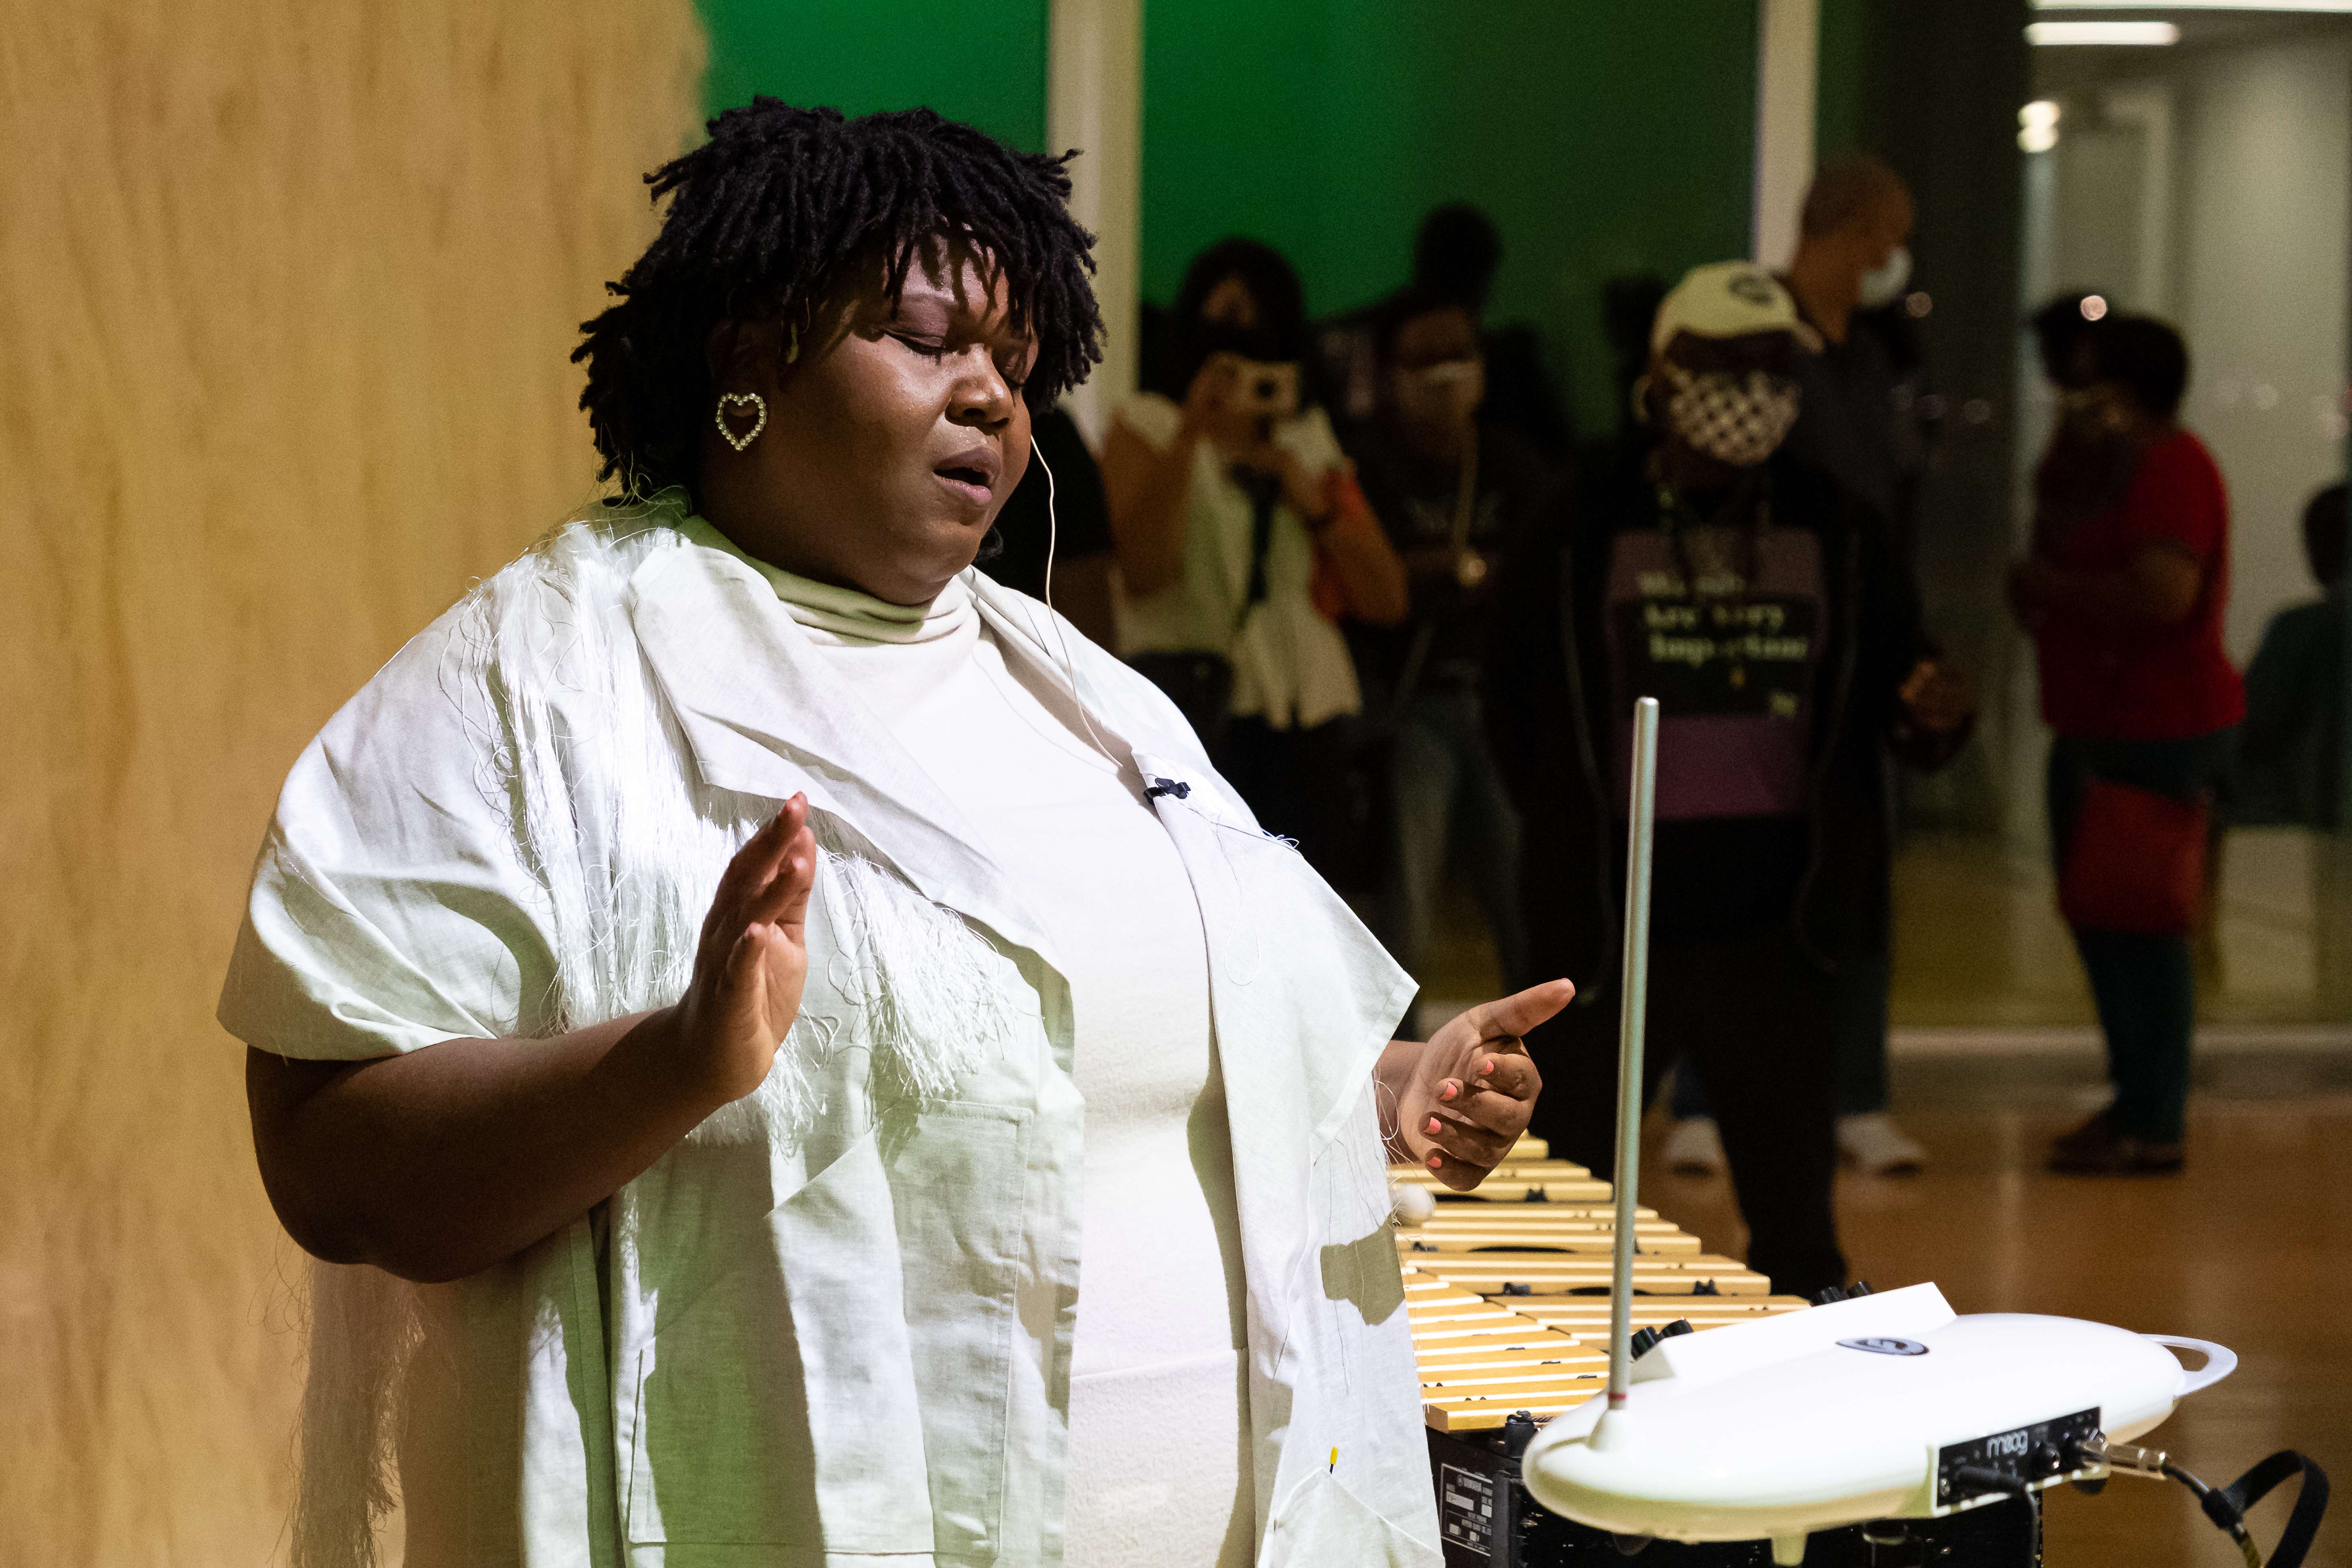 Lisa E. Harris performs for audience while wearing white